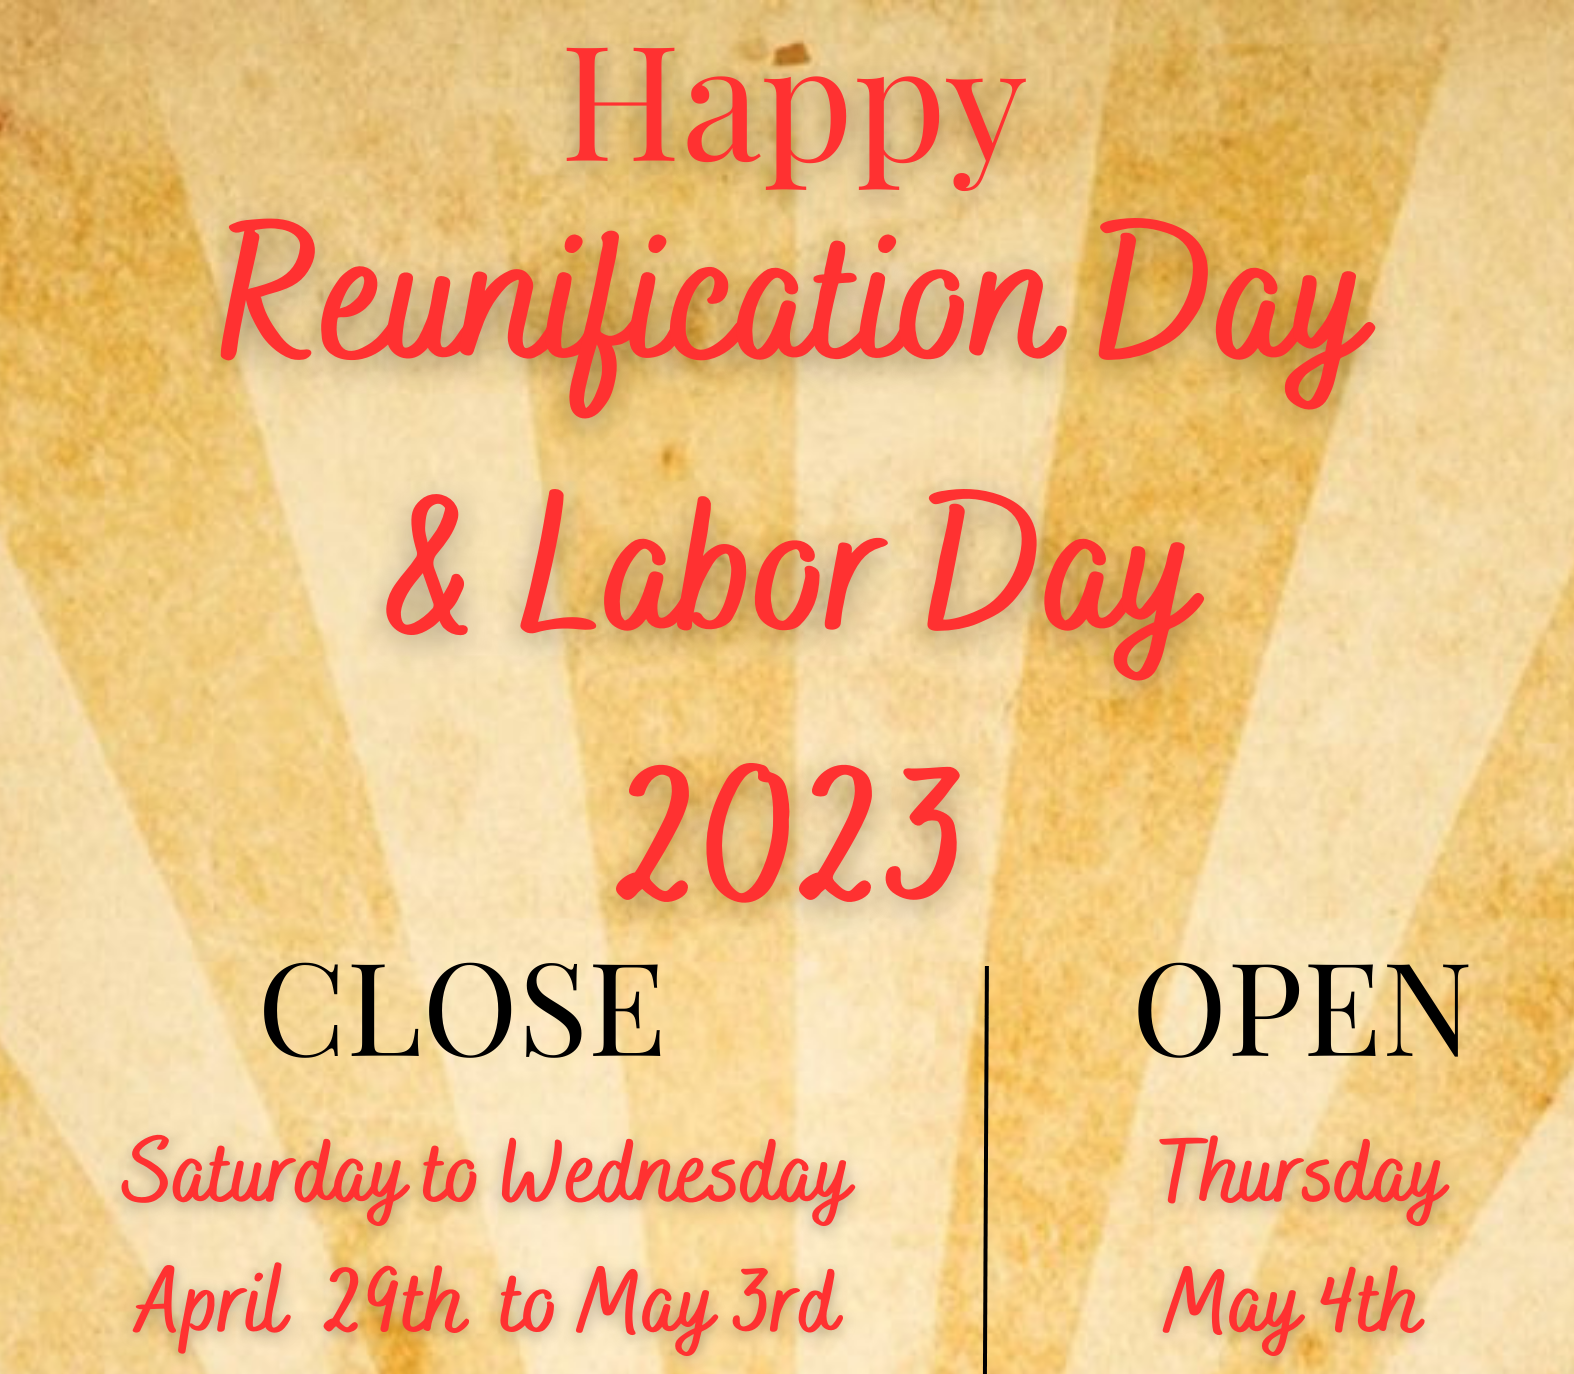 REUNIFICATION AND LABOR DAY 2023 NOTICE | FOMEX GROUP